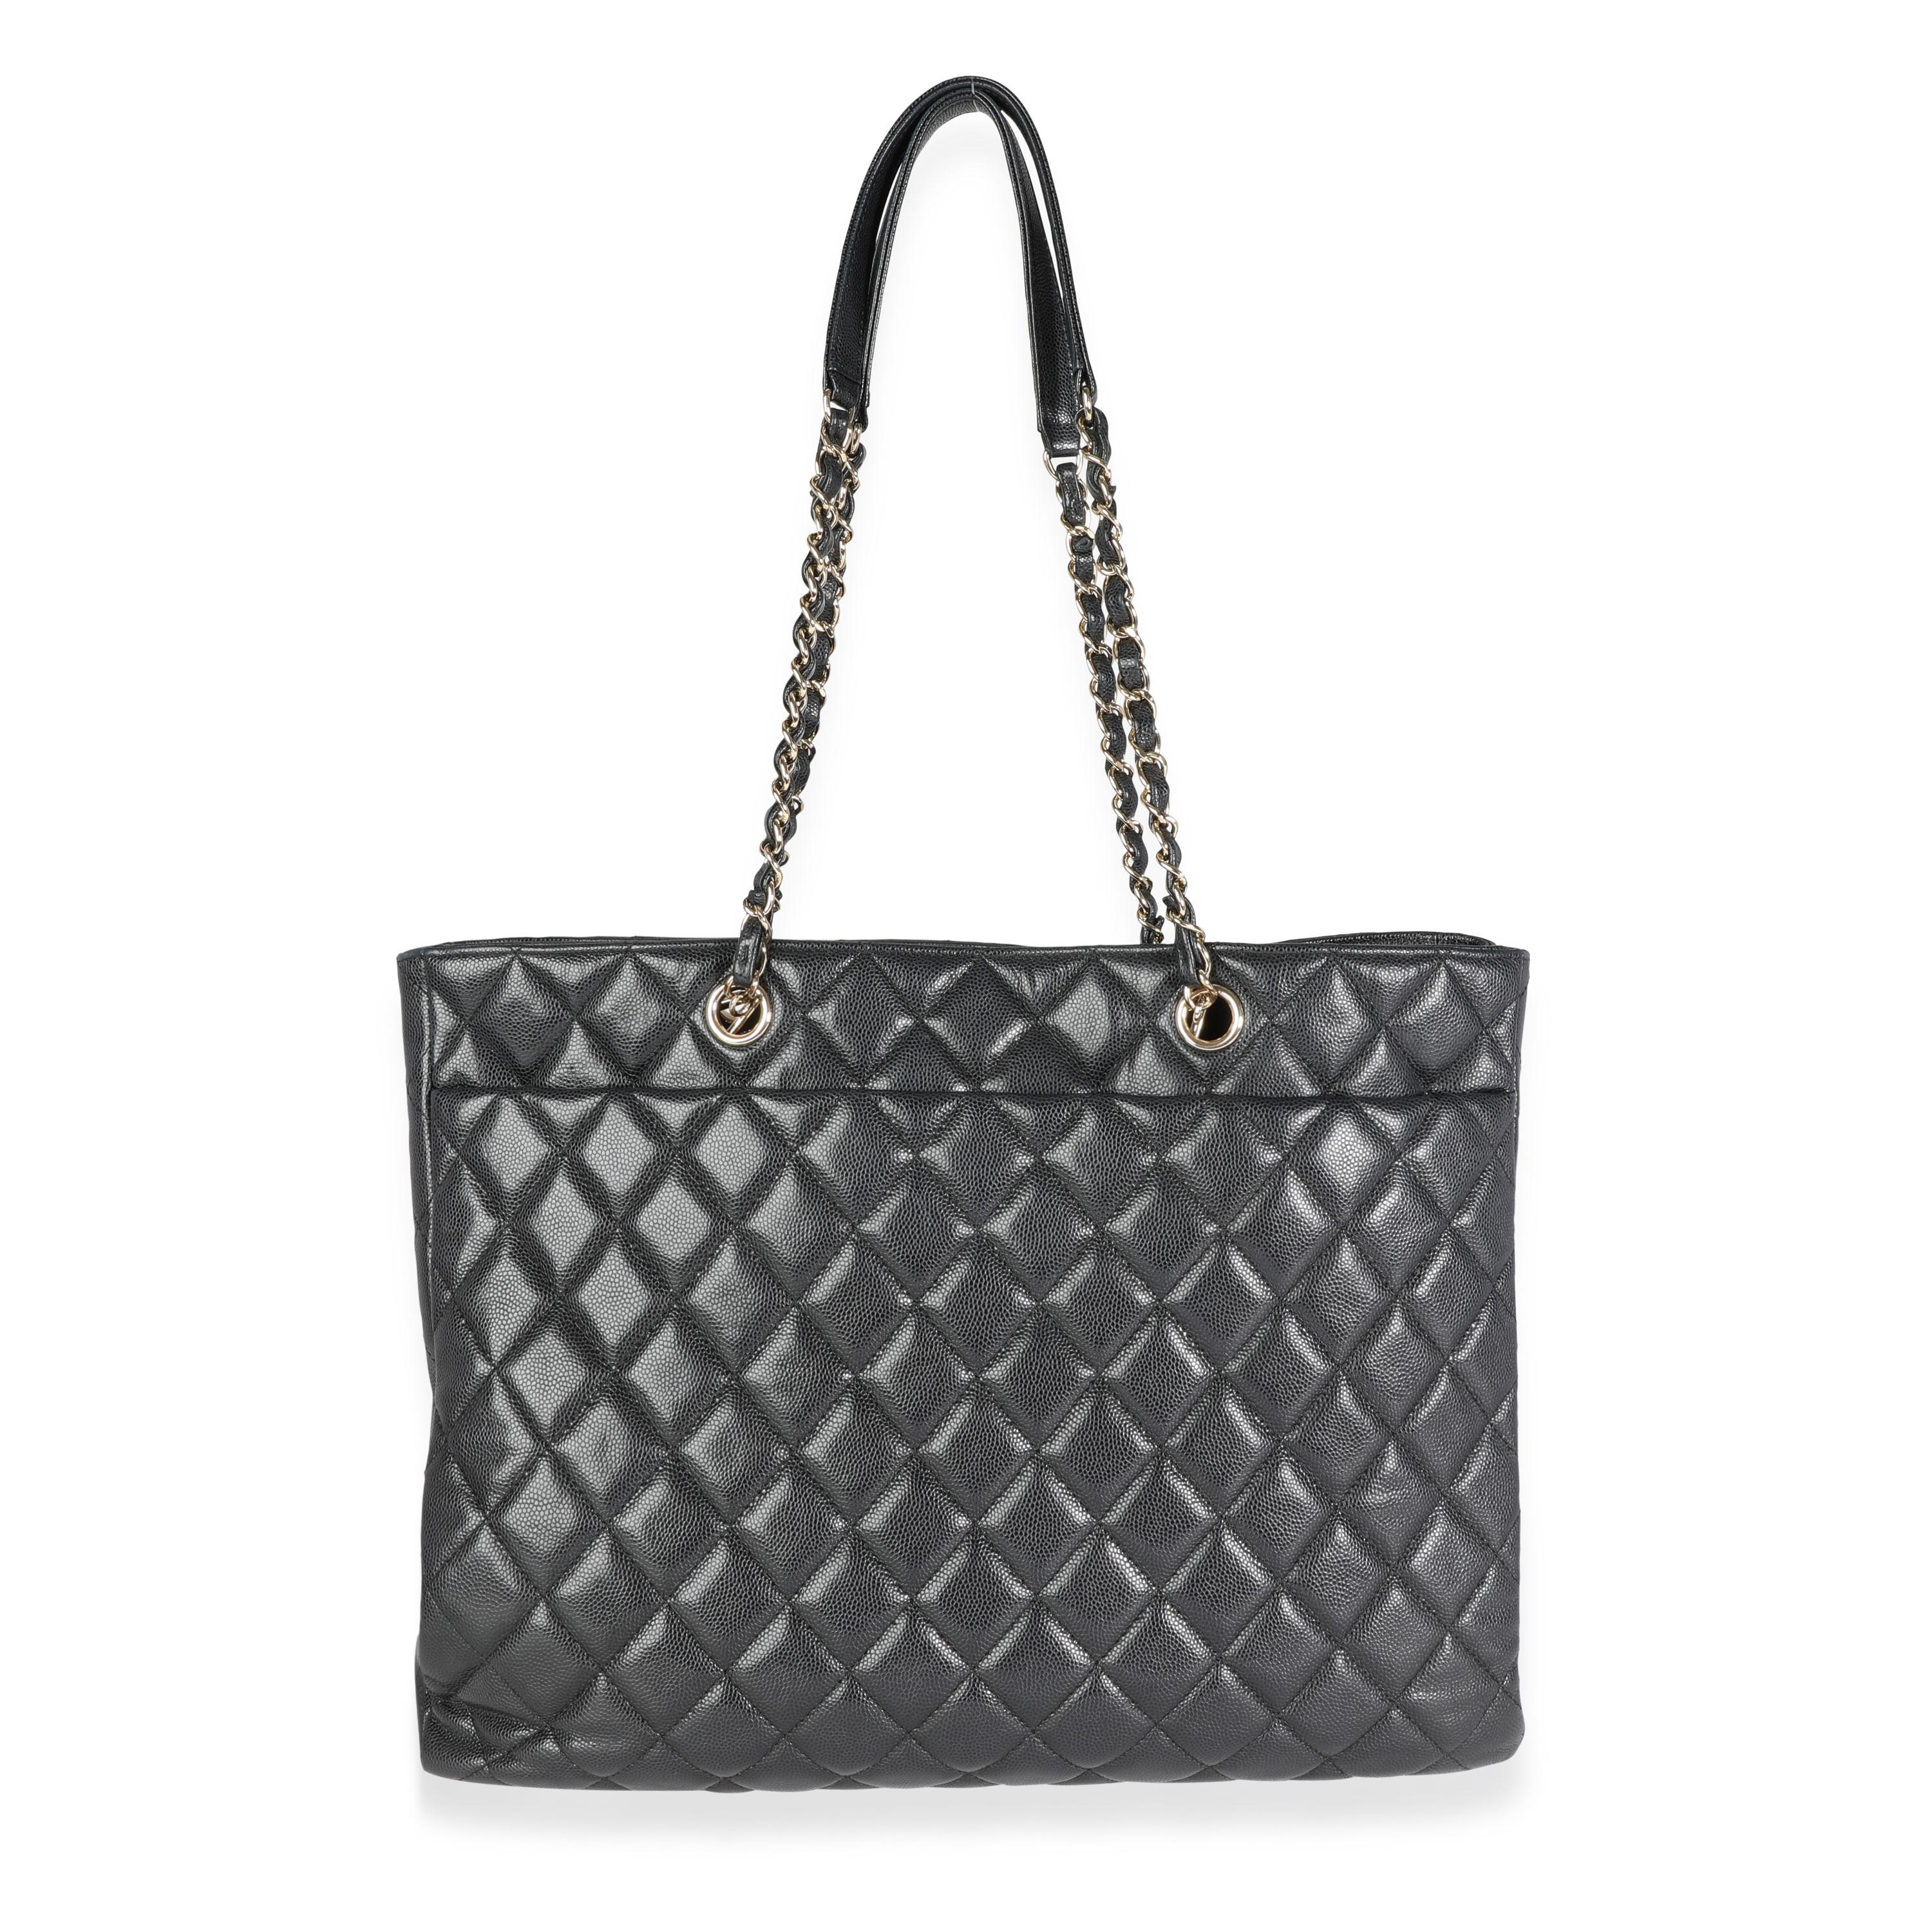 Listing Title: Chanel Black Quilted Caviar Large Shopping Bag
SKU: 115495
MSRP: 4900.00
Condition: Pre-owned (3000)
Handbag Condition: Very Good
Condition Comments: Very Good Condition. Scuffing to corners. Scratching and tarnishing to hardware.